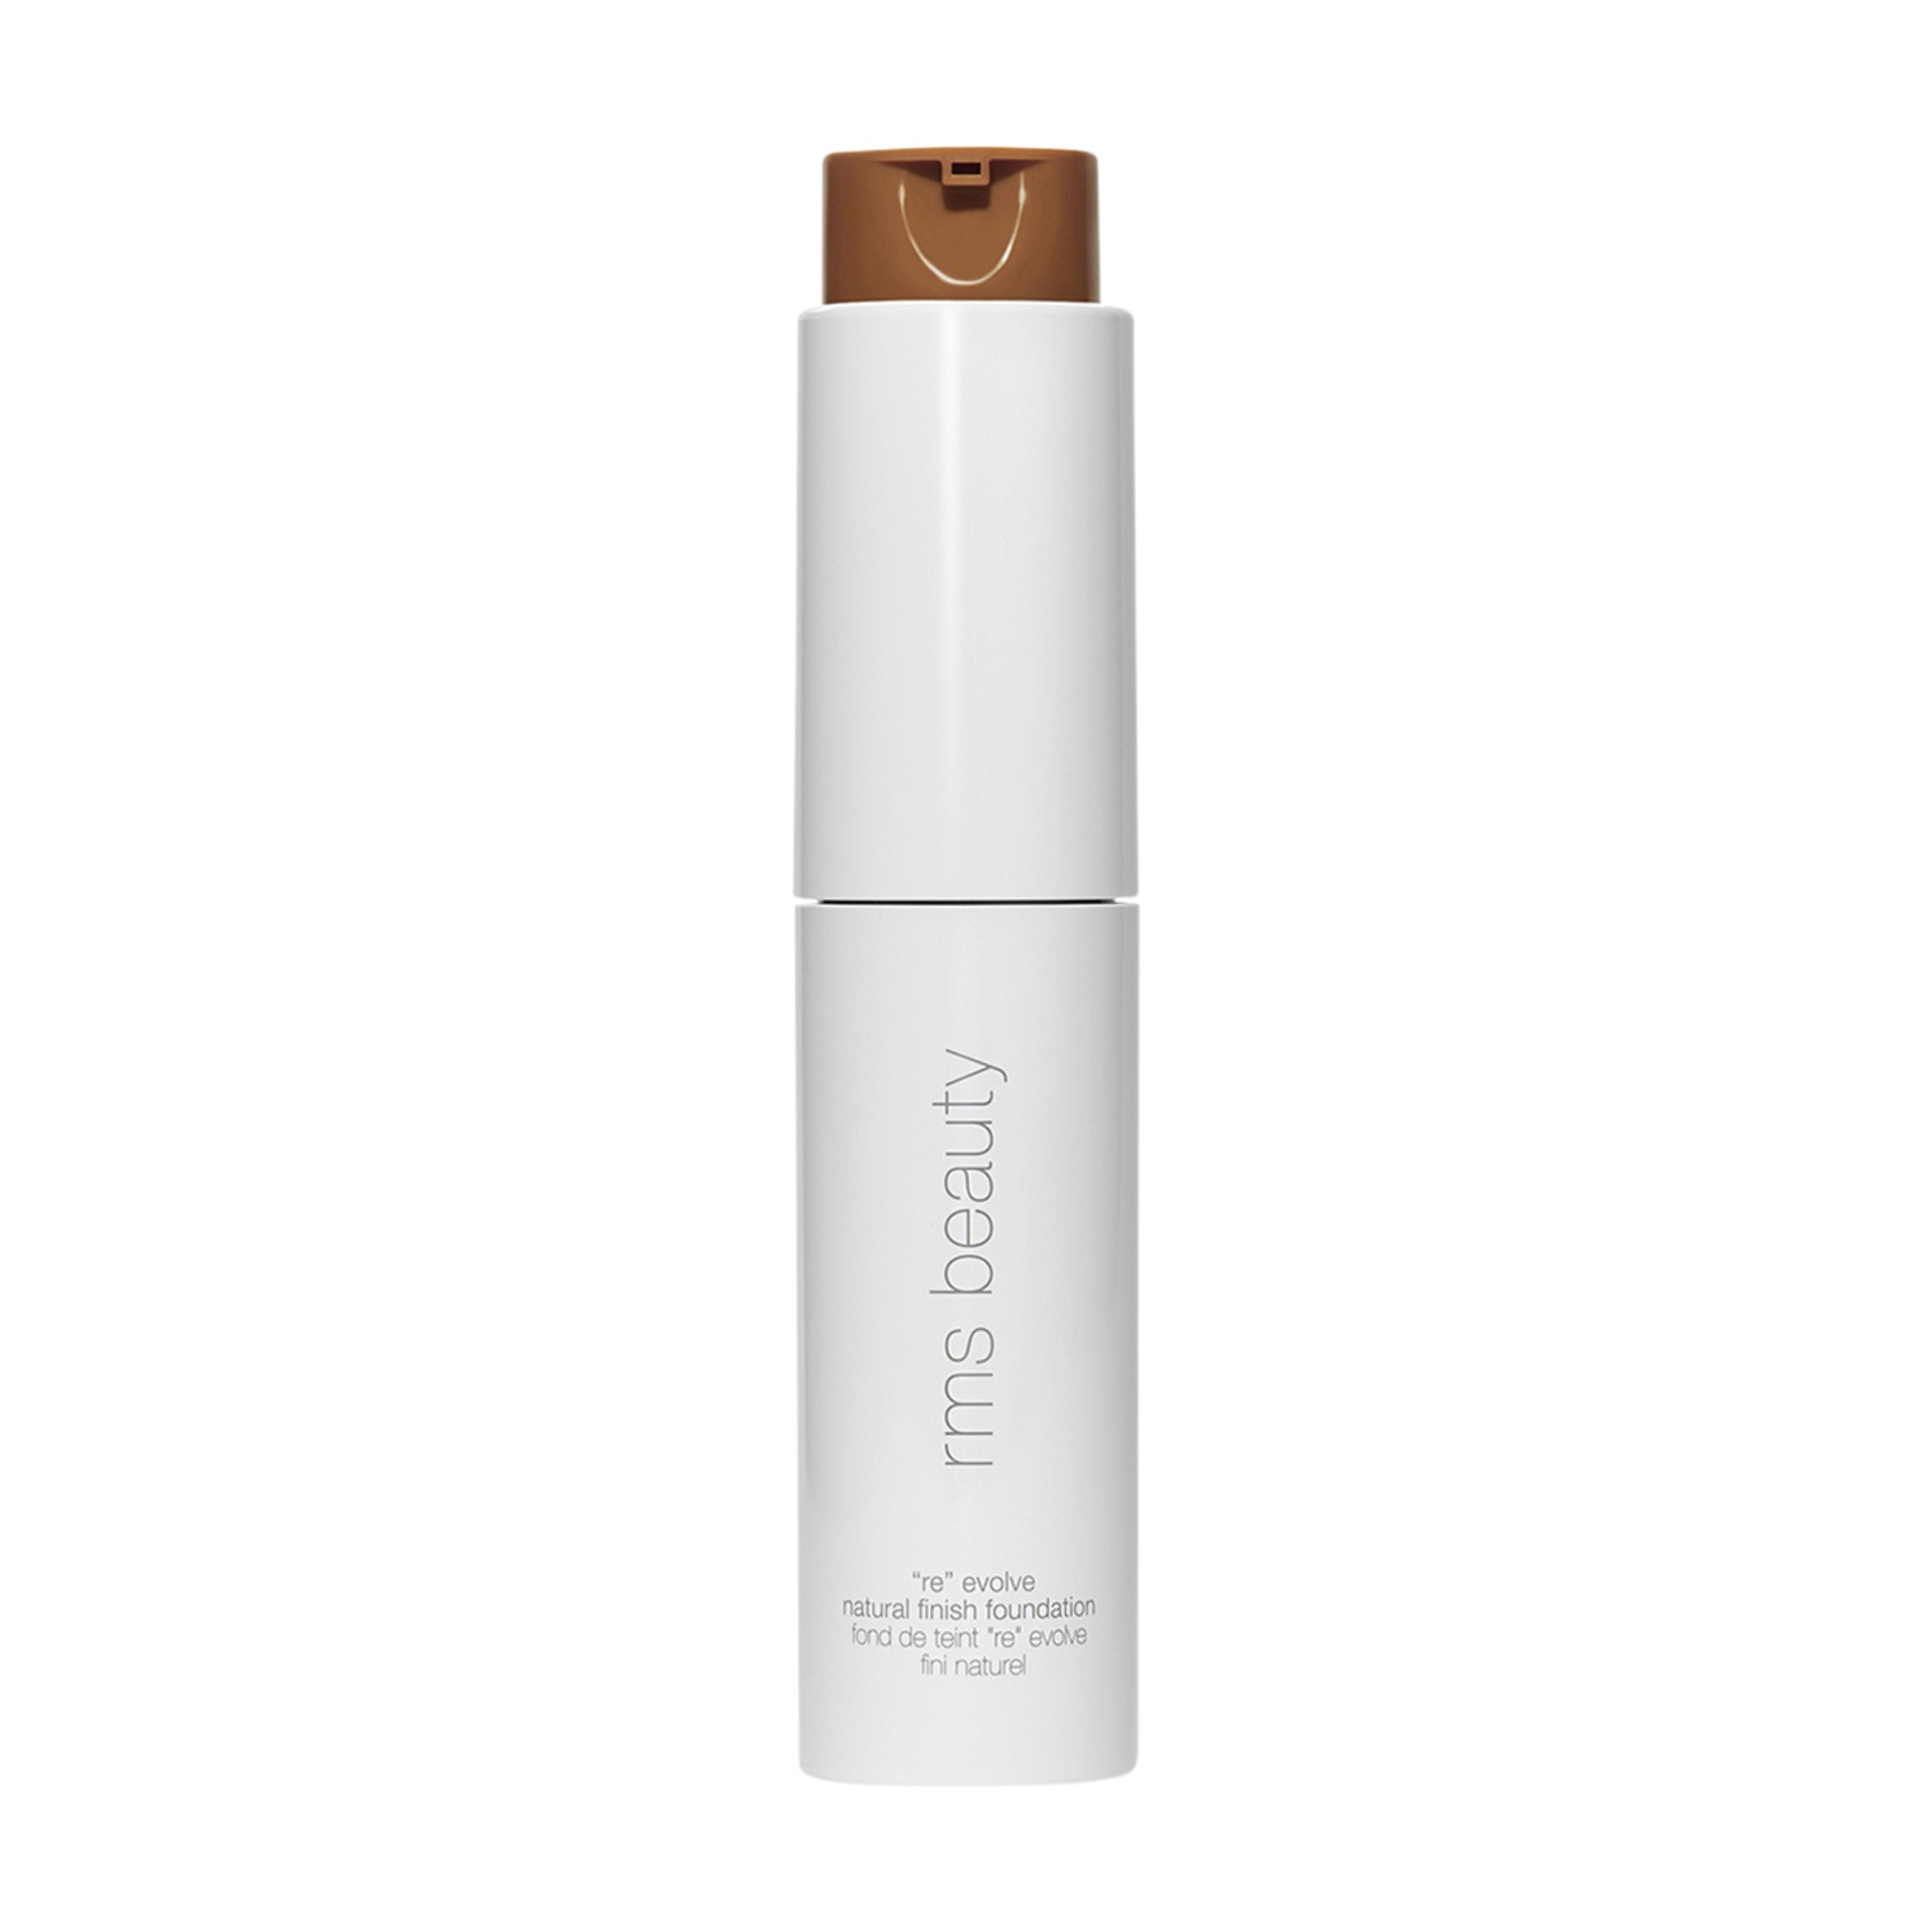 RMS Beauty ReEvolve Natural Finish Liquid Foundation Color/Shade variant: 111 main image. This product is for deep complexions